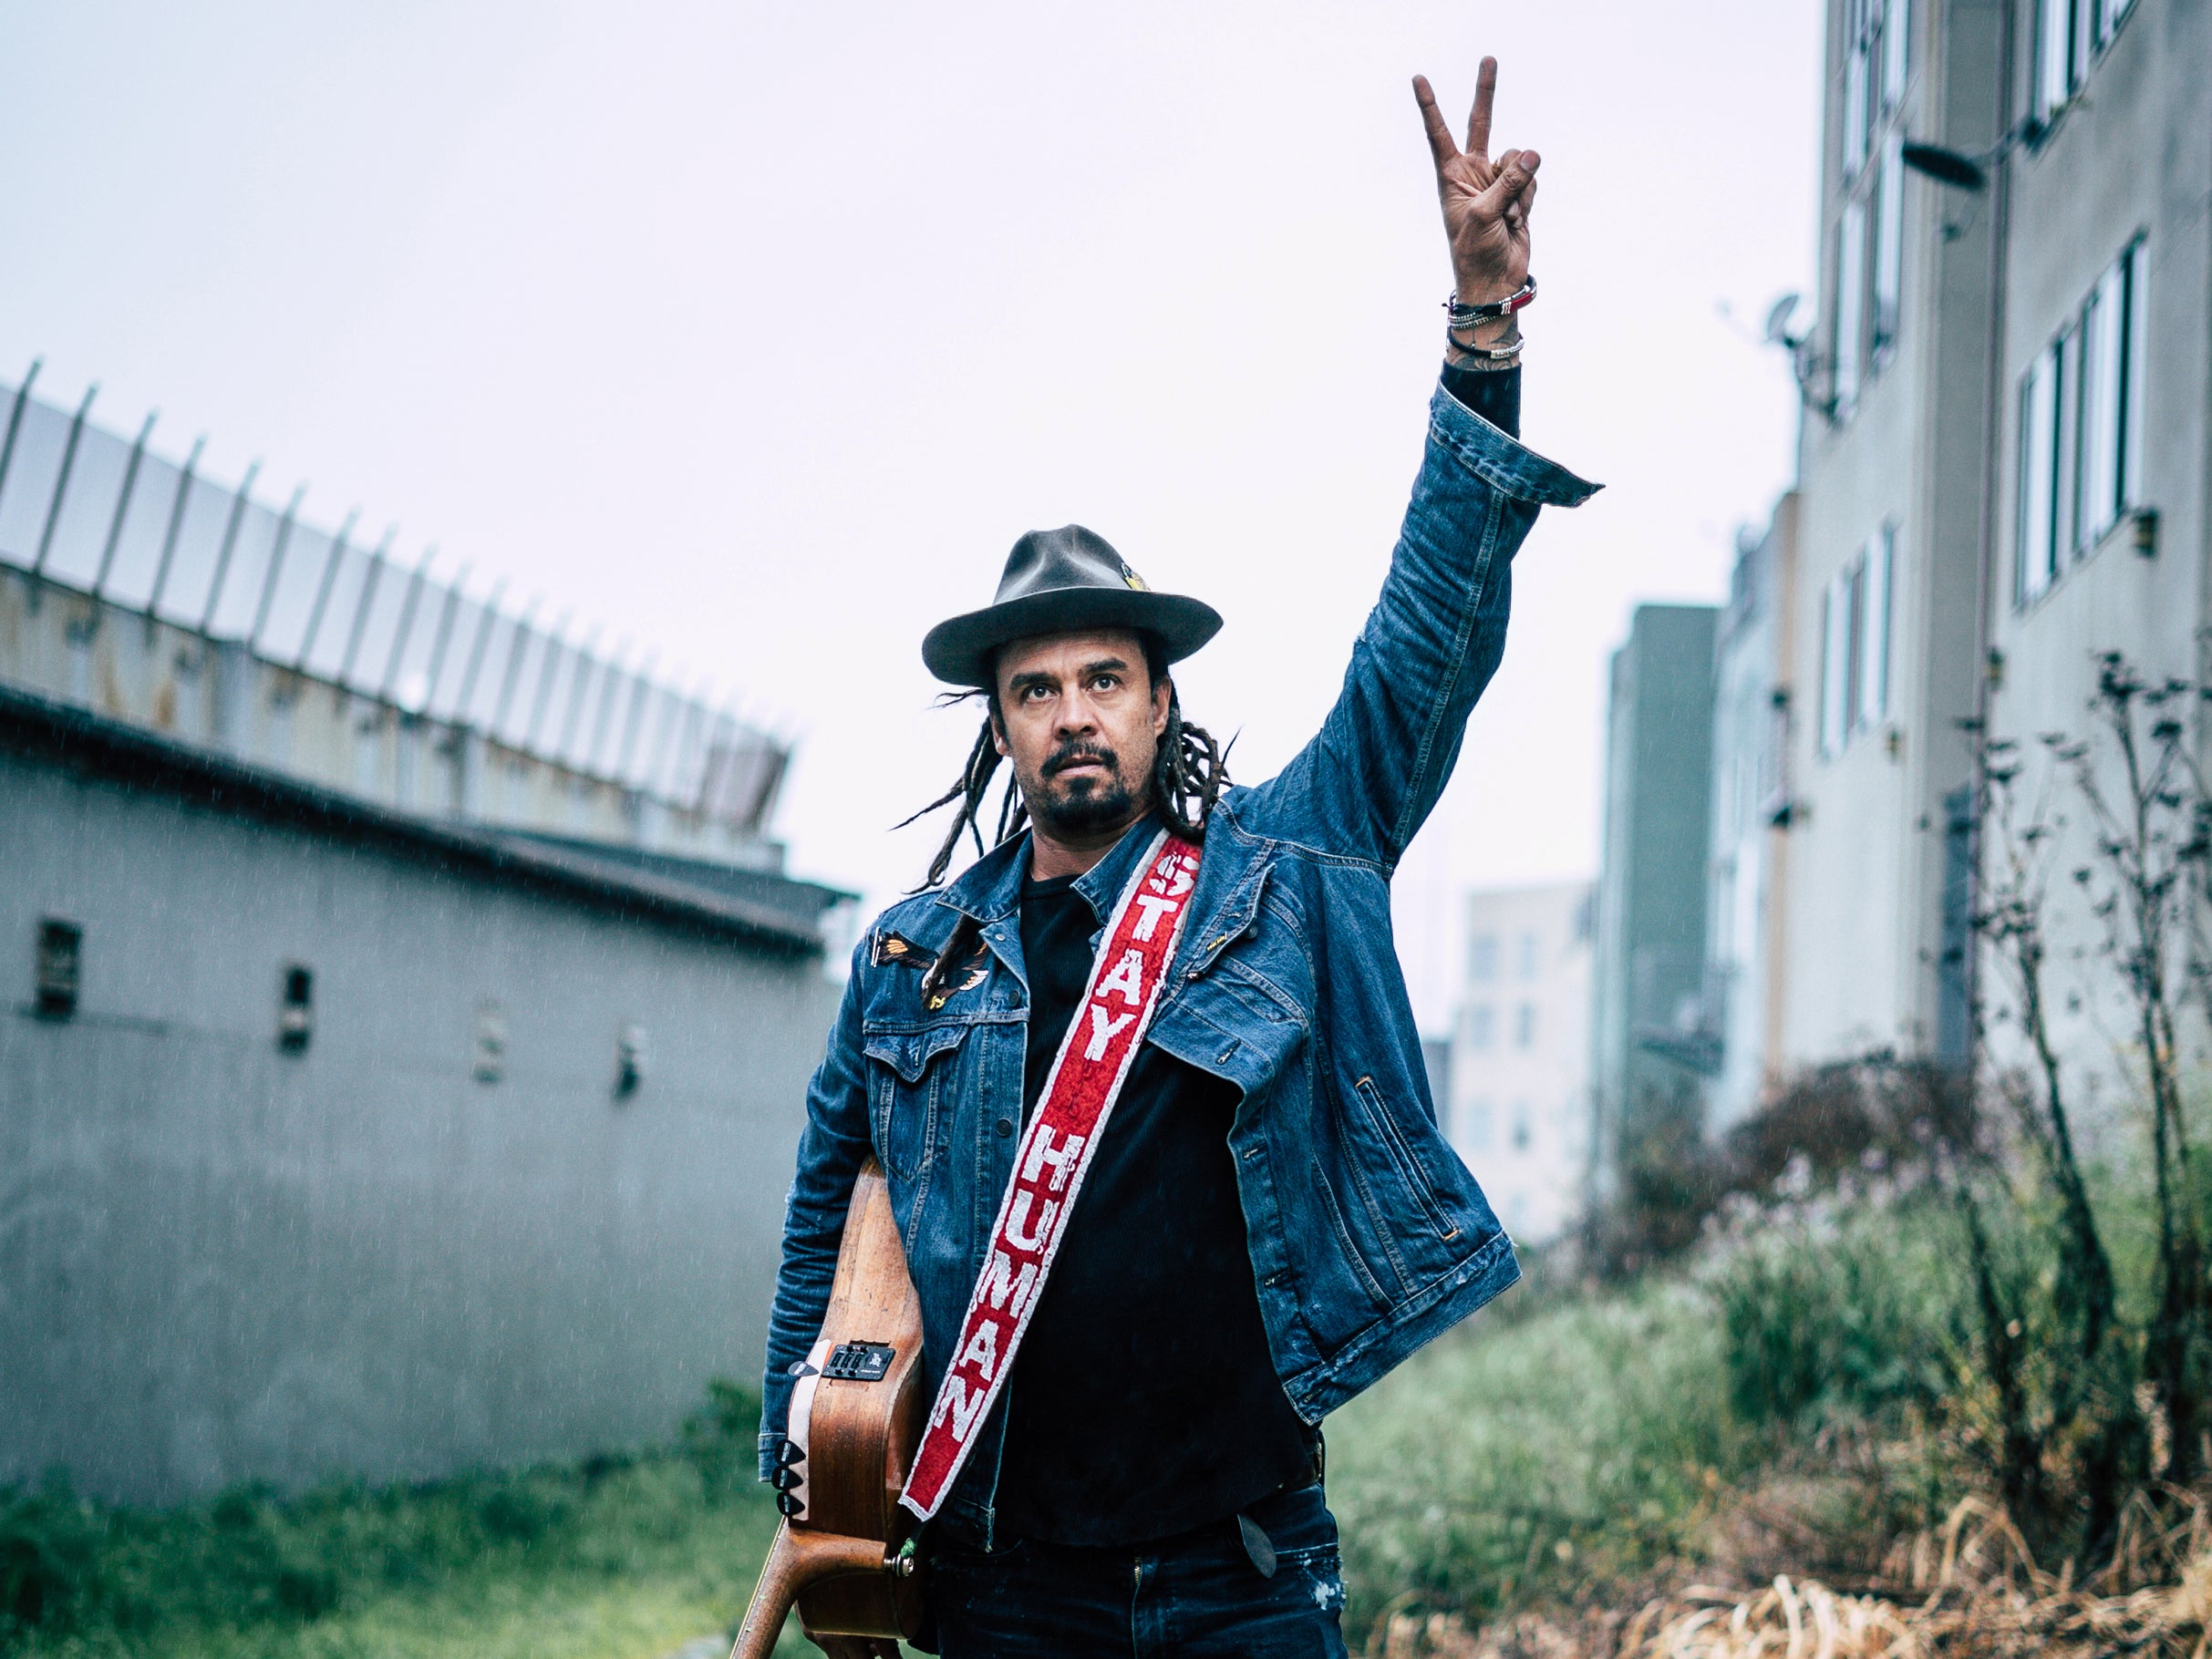 Michael Franti & Spearhead with Special Guest Stephen Marley